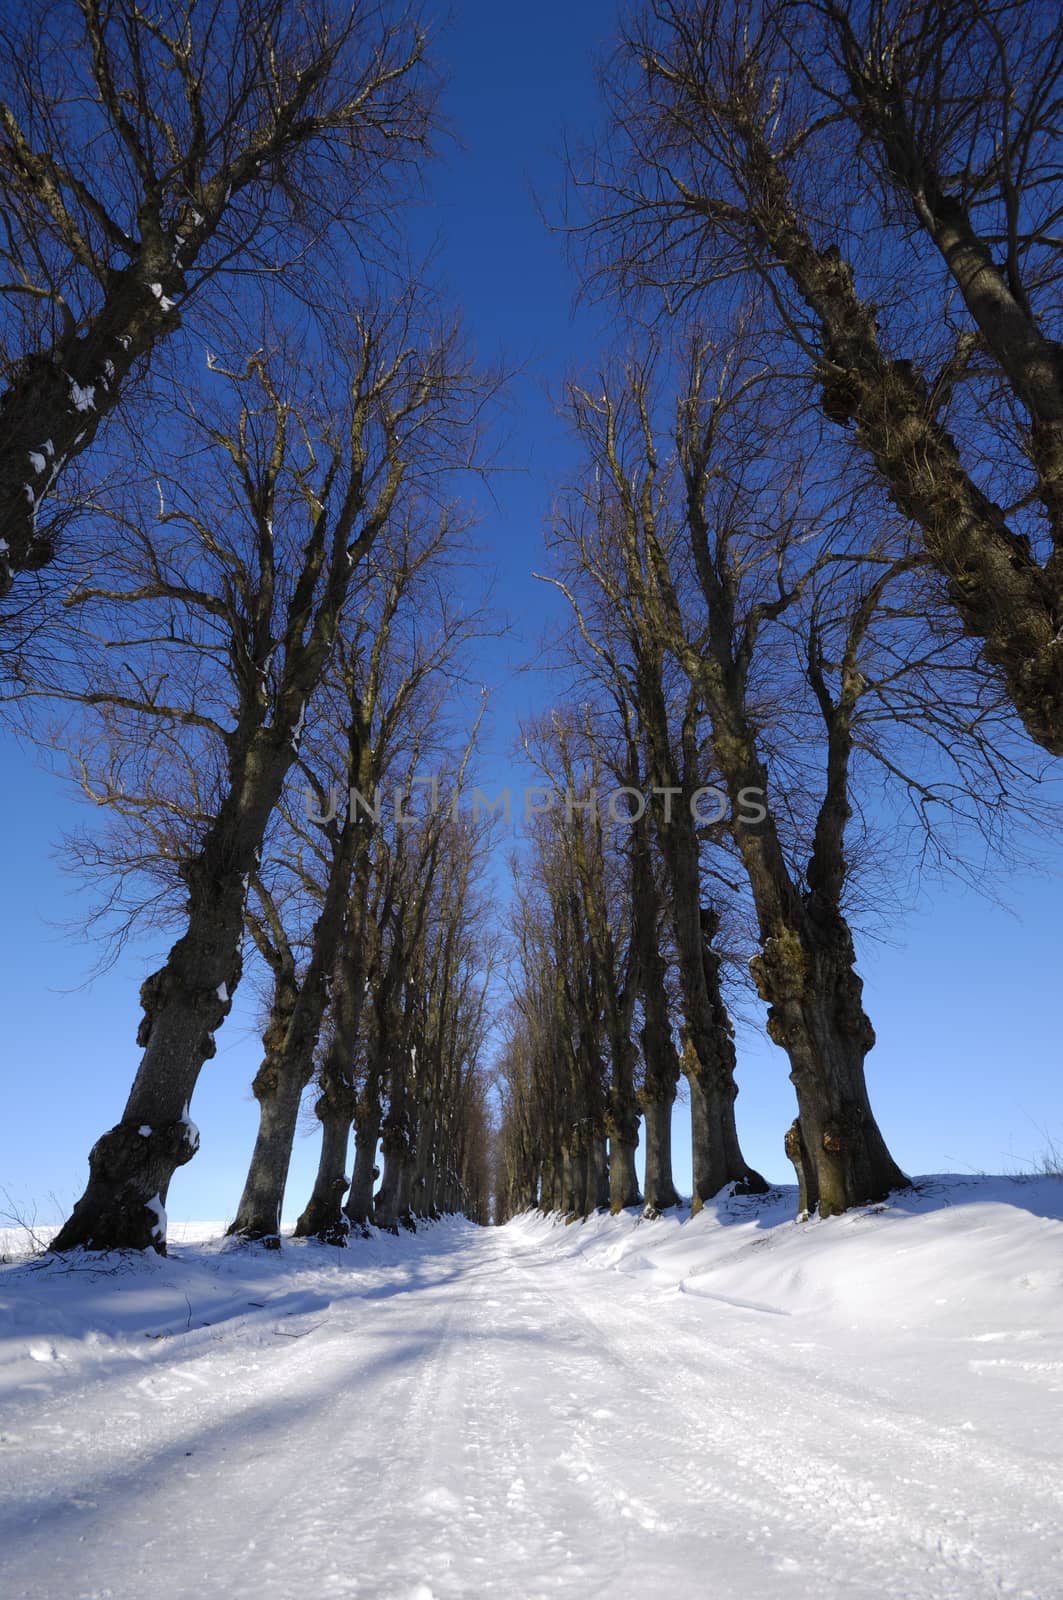 Pathway at winter by cfoto